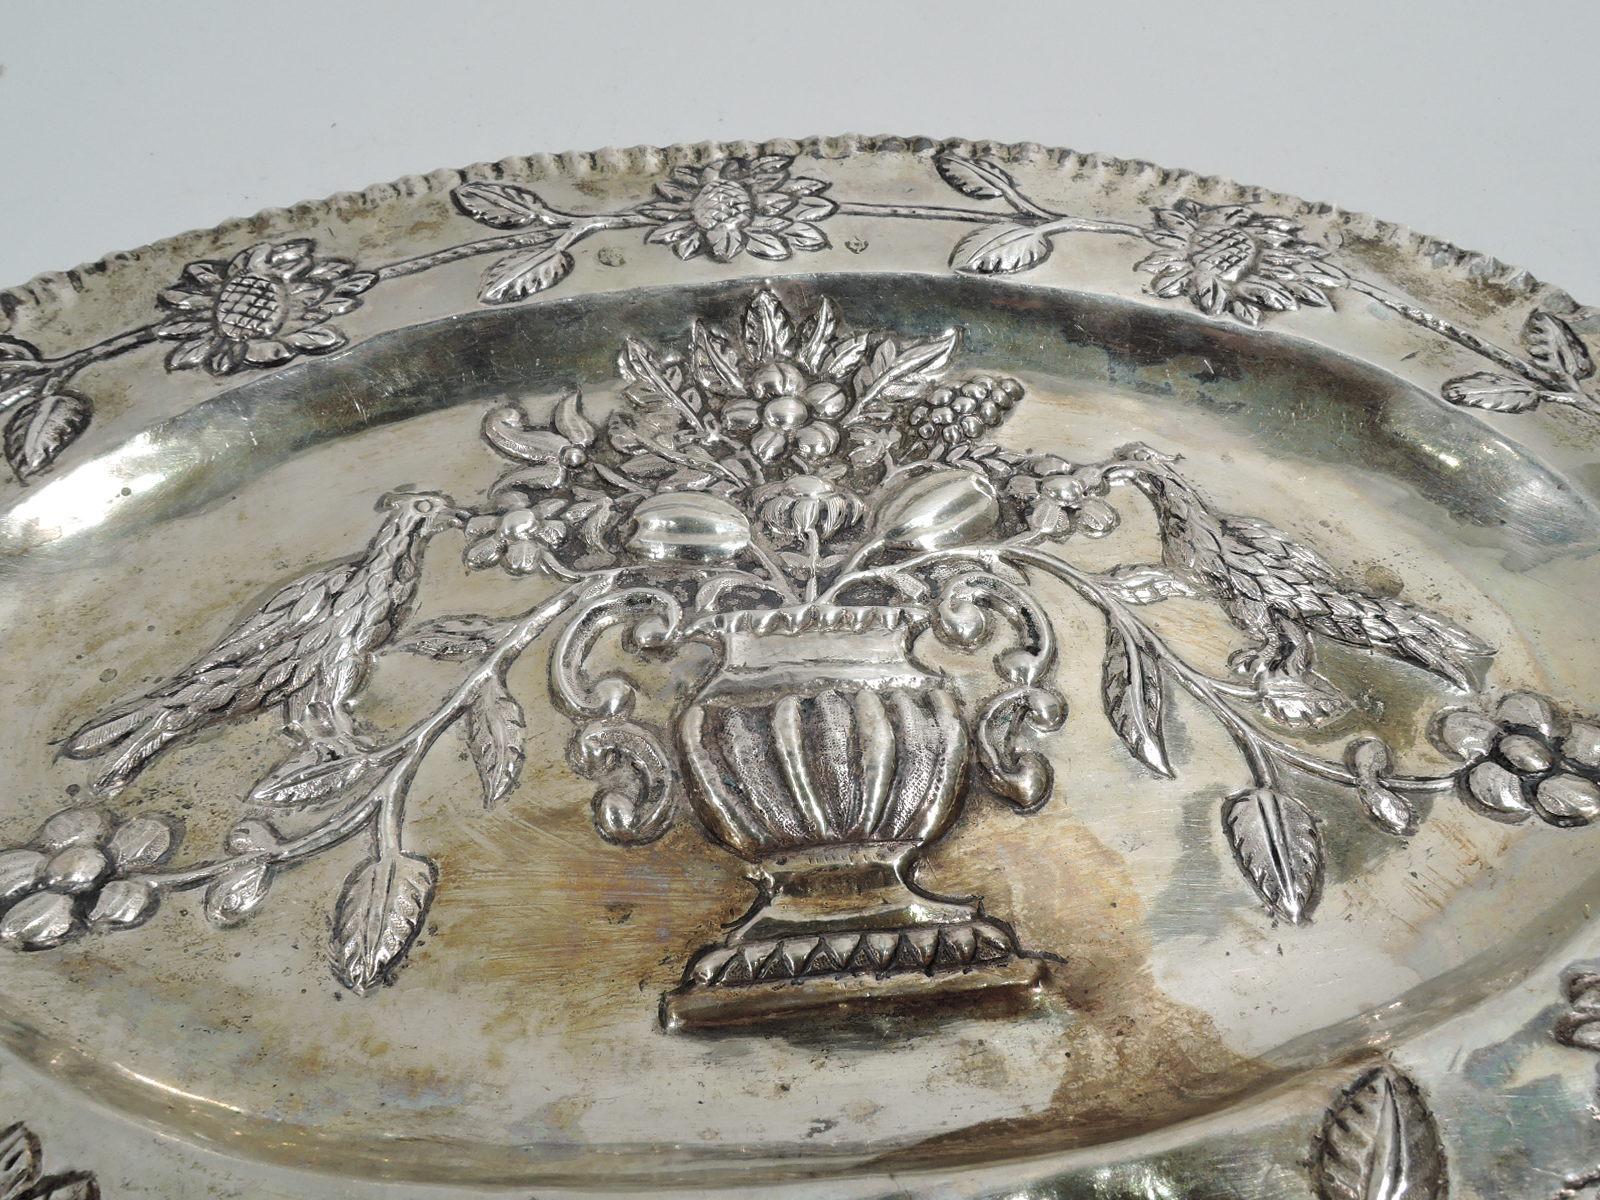 German Neoclassical silver tray, 18th century. Oval with crimped rim. Embossed flower basket in well and garland on shoulder. A naïve representation of modish ornament. Marked. Weight: 5.5 troy ounces.